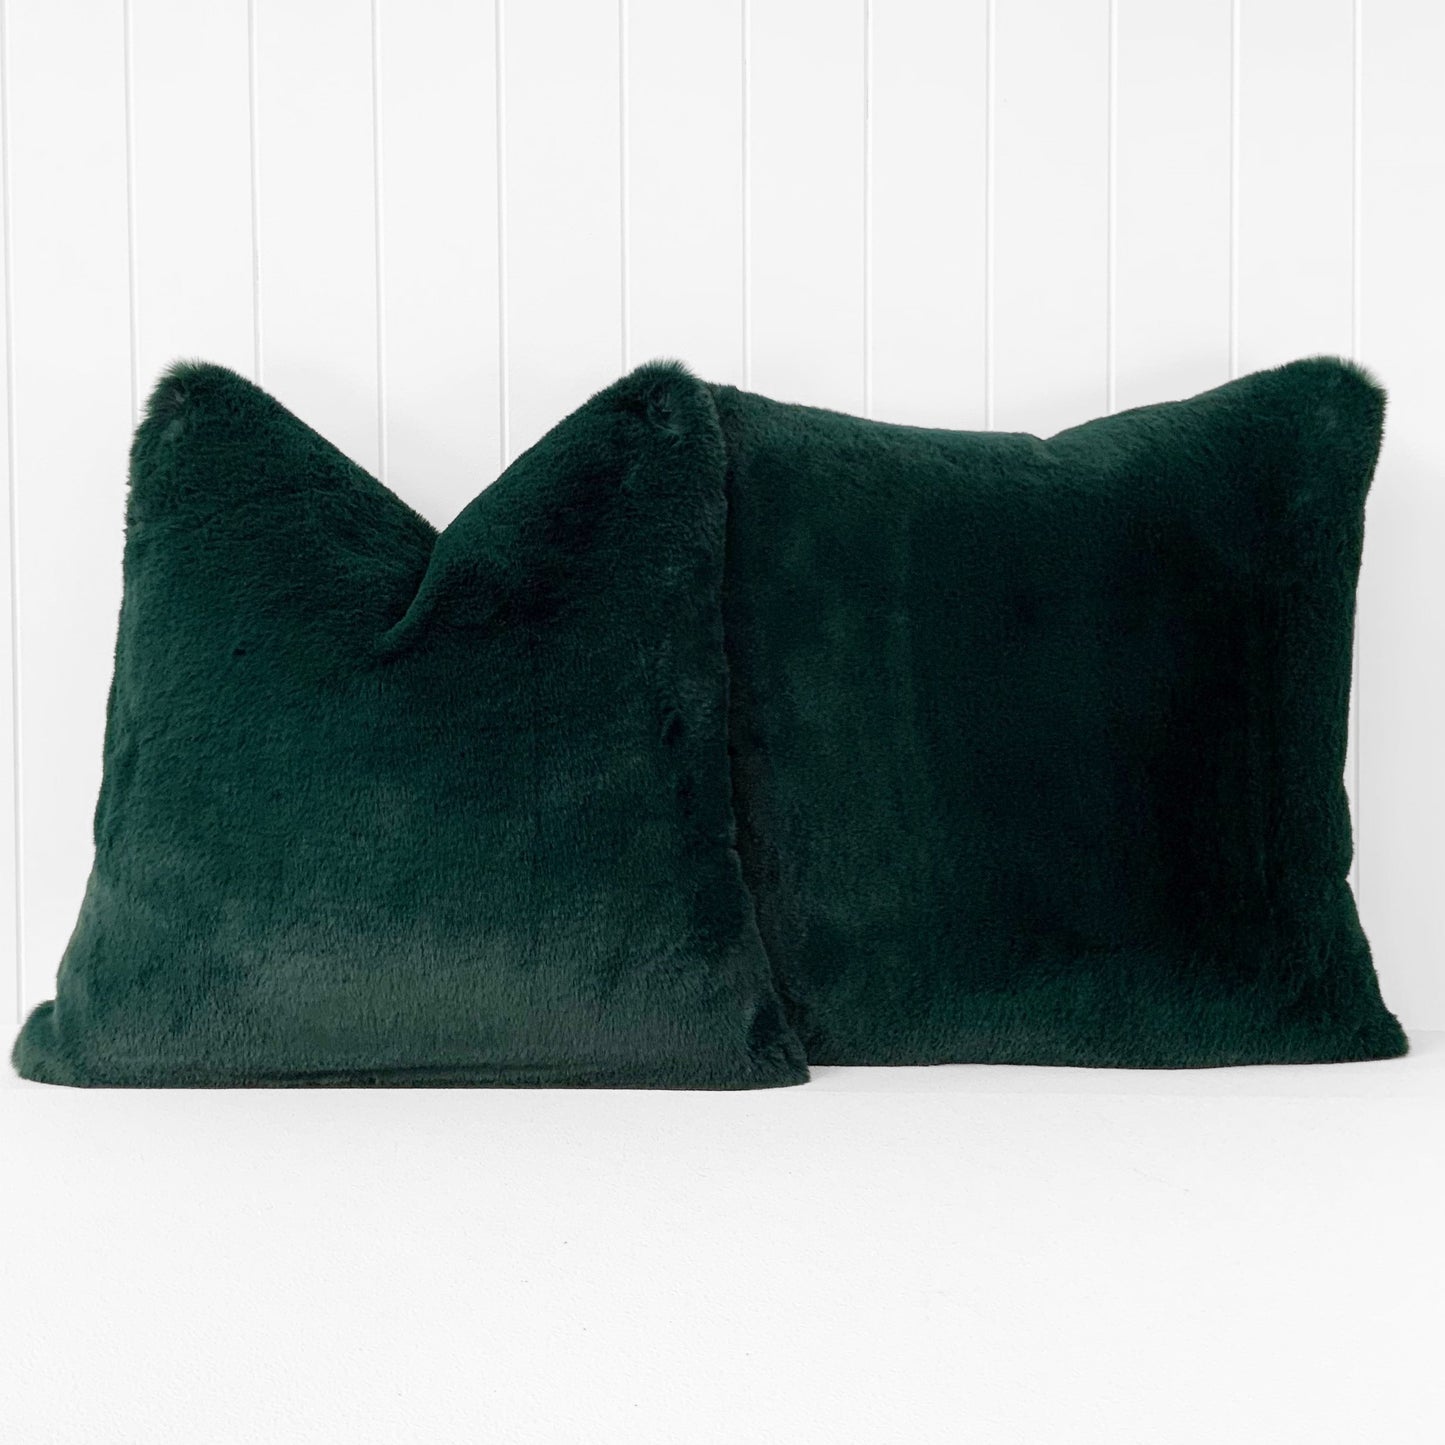 PLUSH BUNNY CUSHION | FOREST GREEN | 55CM X 55CM | CHOOSE FEATHER OR FIBRE FILLING